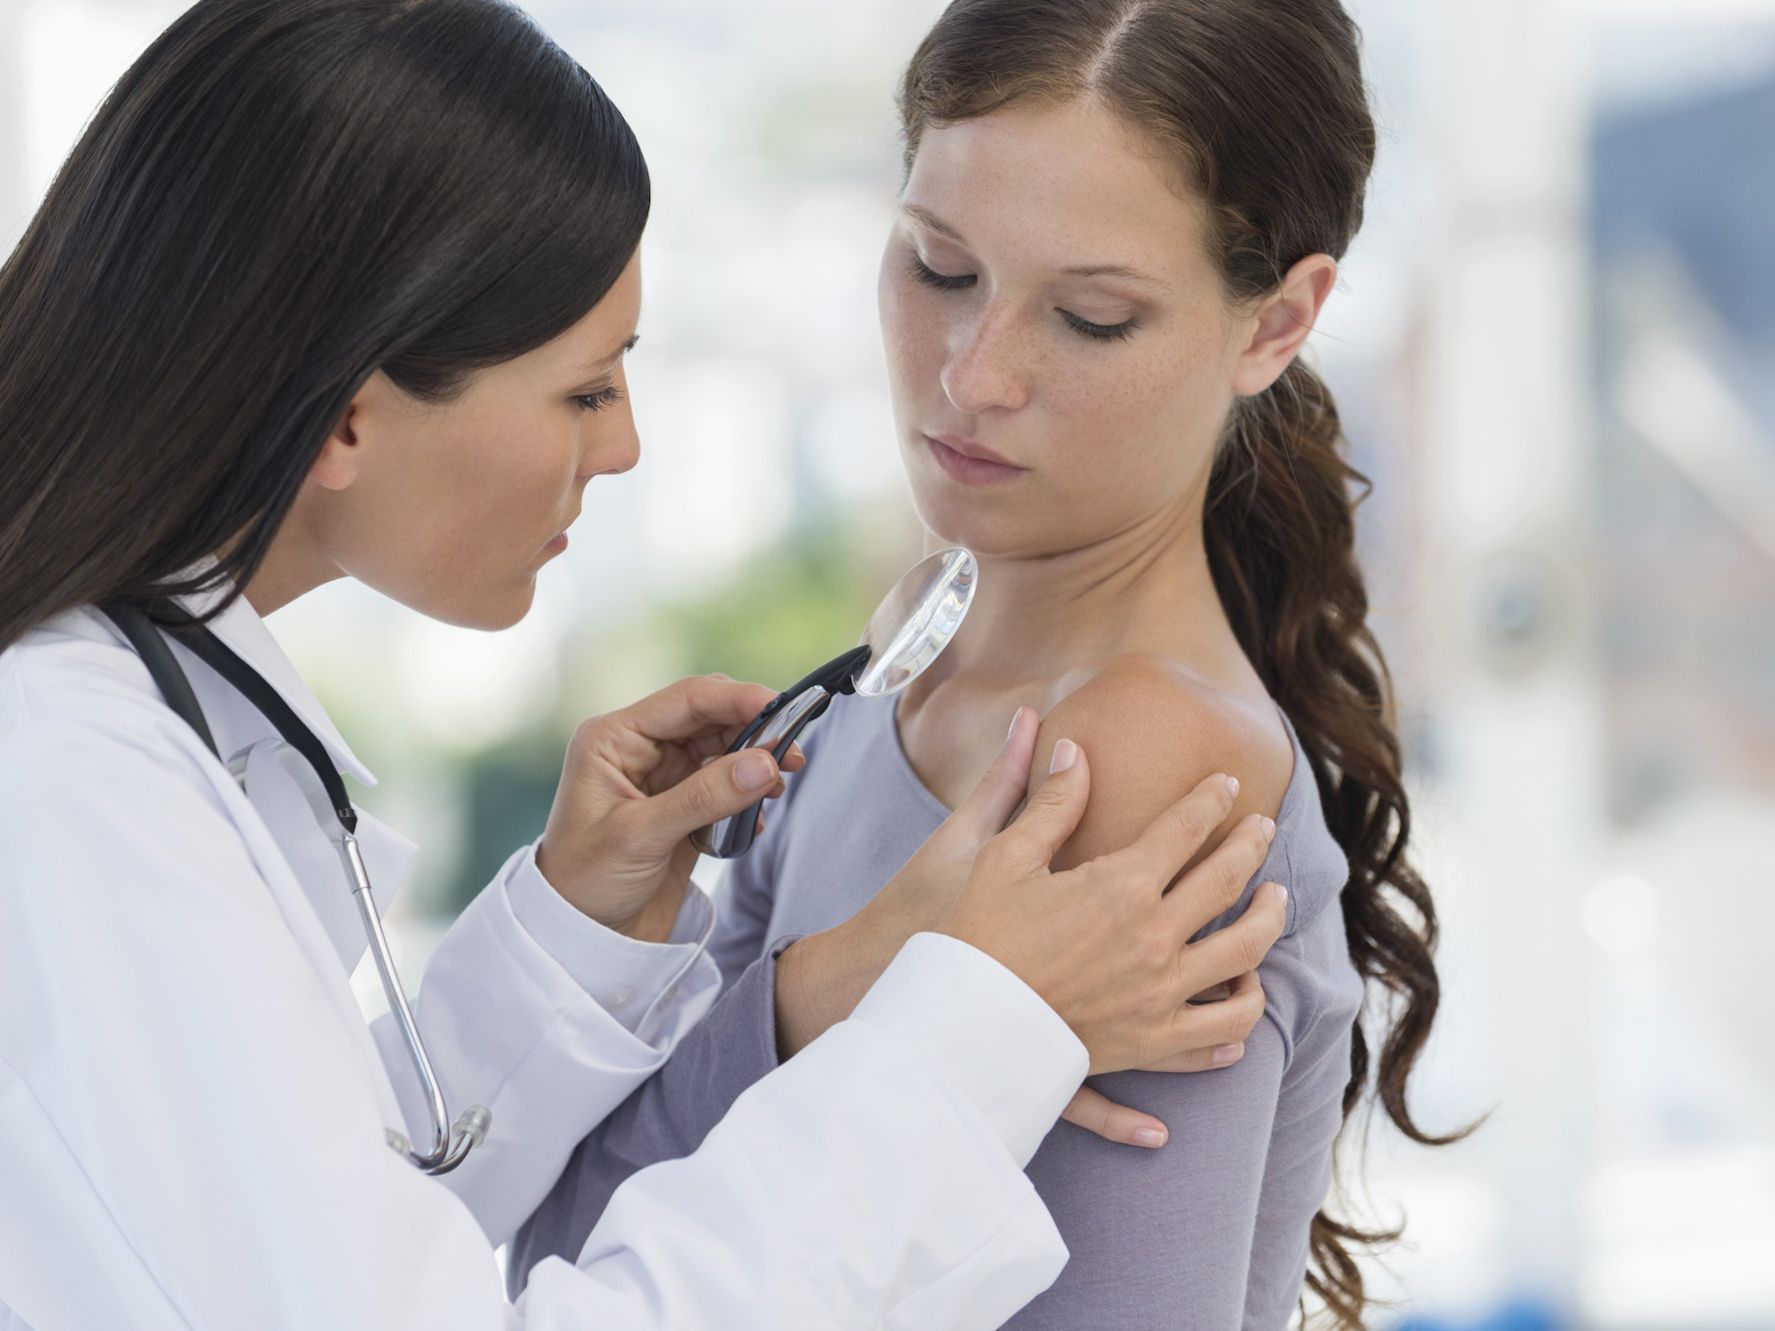 Questions to ask a dermatologist during treatment